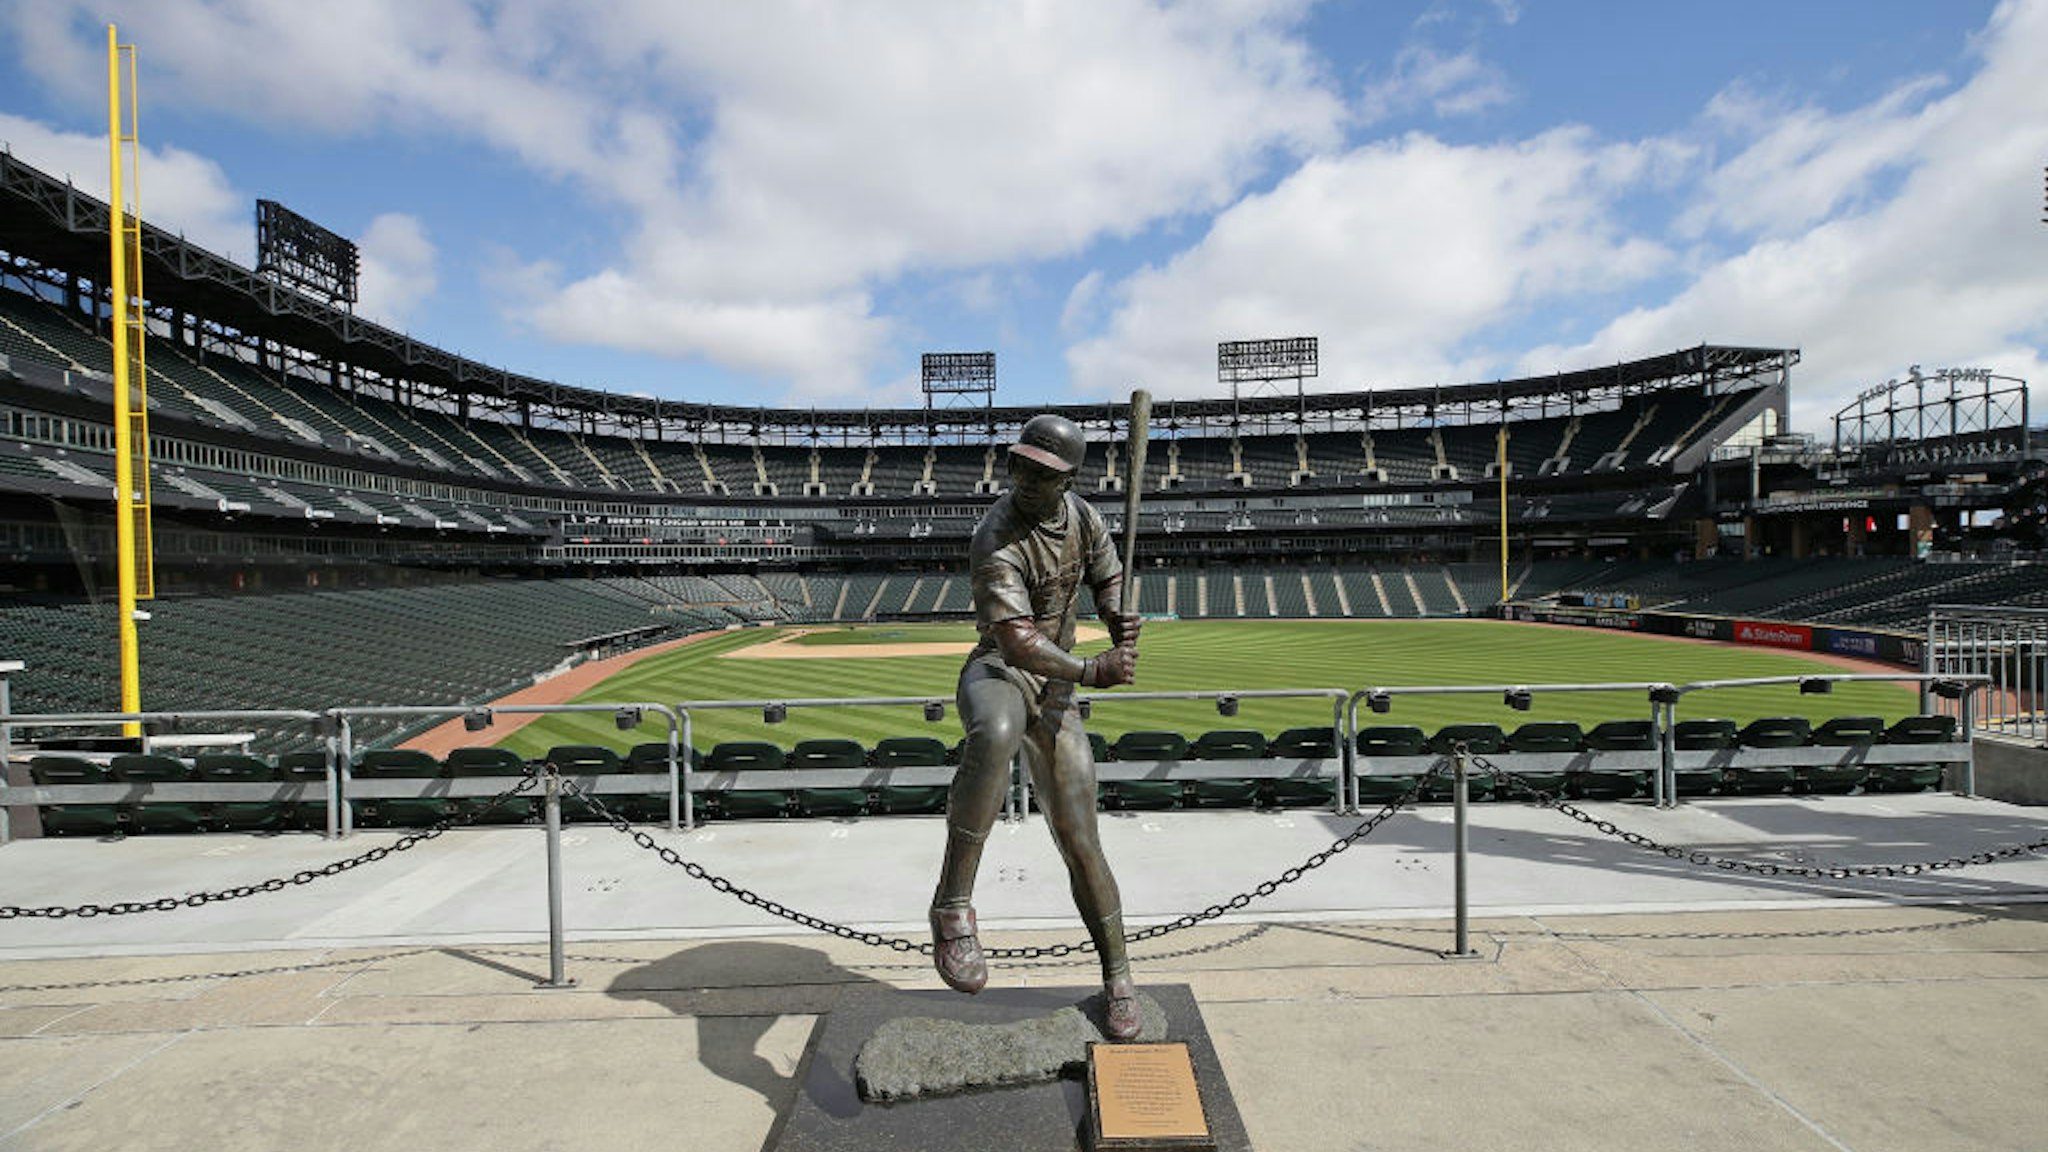 CHICAGO, ILLINOIS - MAY 08: A general view of a statue of Chicago White Sox Hall of Fame player Harold Baines is seen in the outfield of Guaranteed Rate Feld, home of the White Sox, on May 08, 2020 in Chicago, Illinois. The 2020 Major League Baseball season is on hold due to the COVID-19 pandemic. (Photo by Jonathan Daniel/Getty Images)